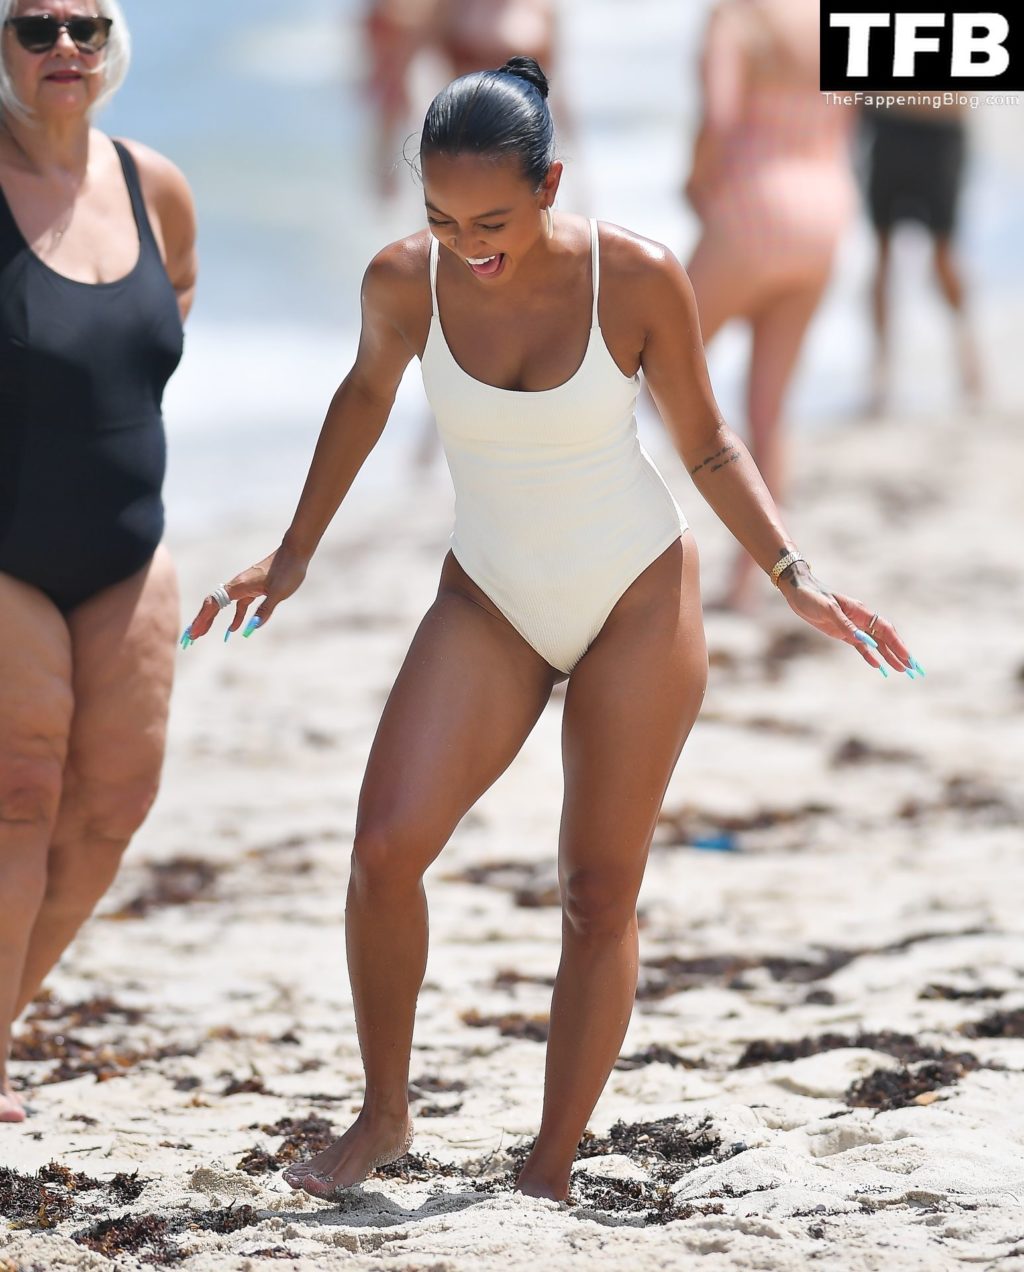 Karrueche Tran Sexy The Fappening Blog 3 1024x1272 - Karrueche Tran Looks Incredible in a White Swimsuit on the Beach in Miami (45 Photos)